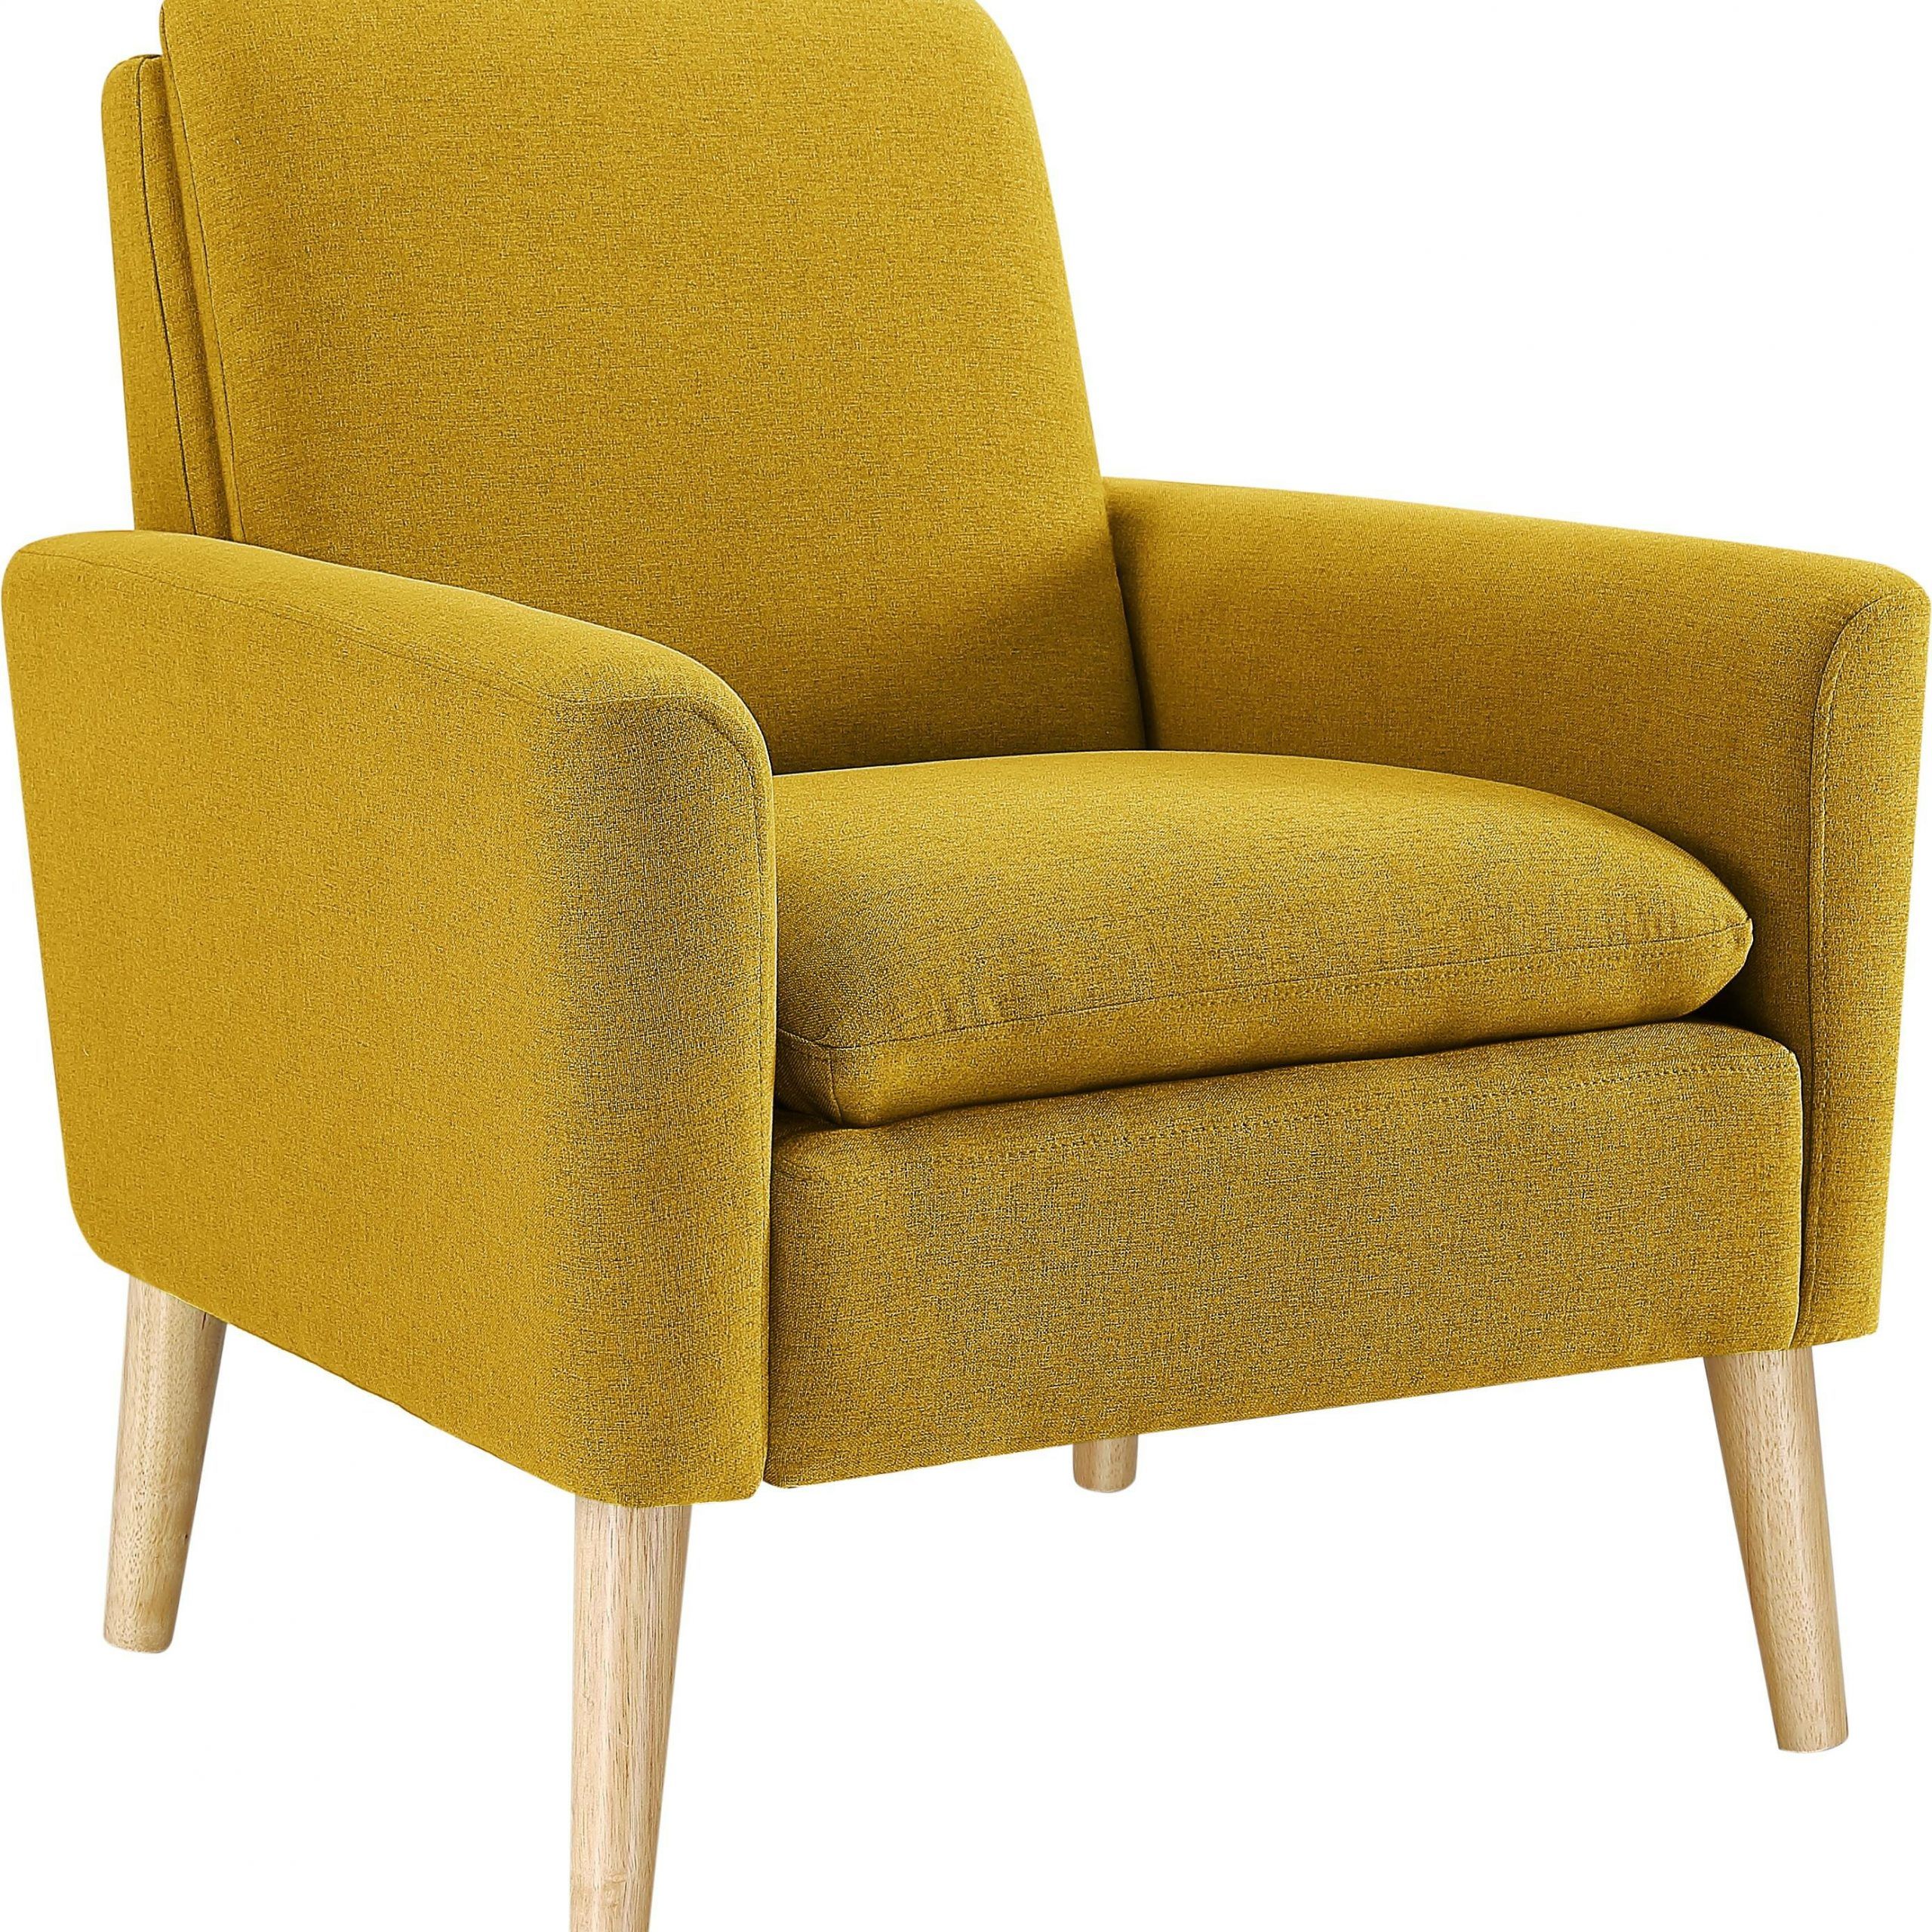 George 30" W Linen Blend Armchair With Regard To Hiltz Armchairs (View 3 of 15)